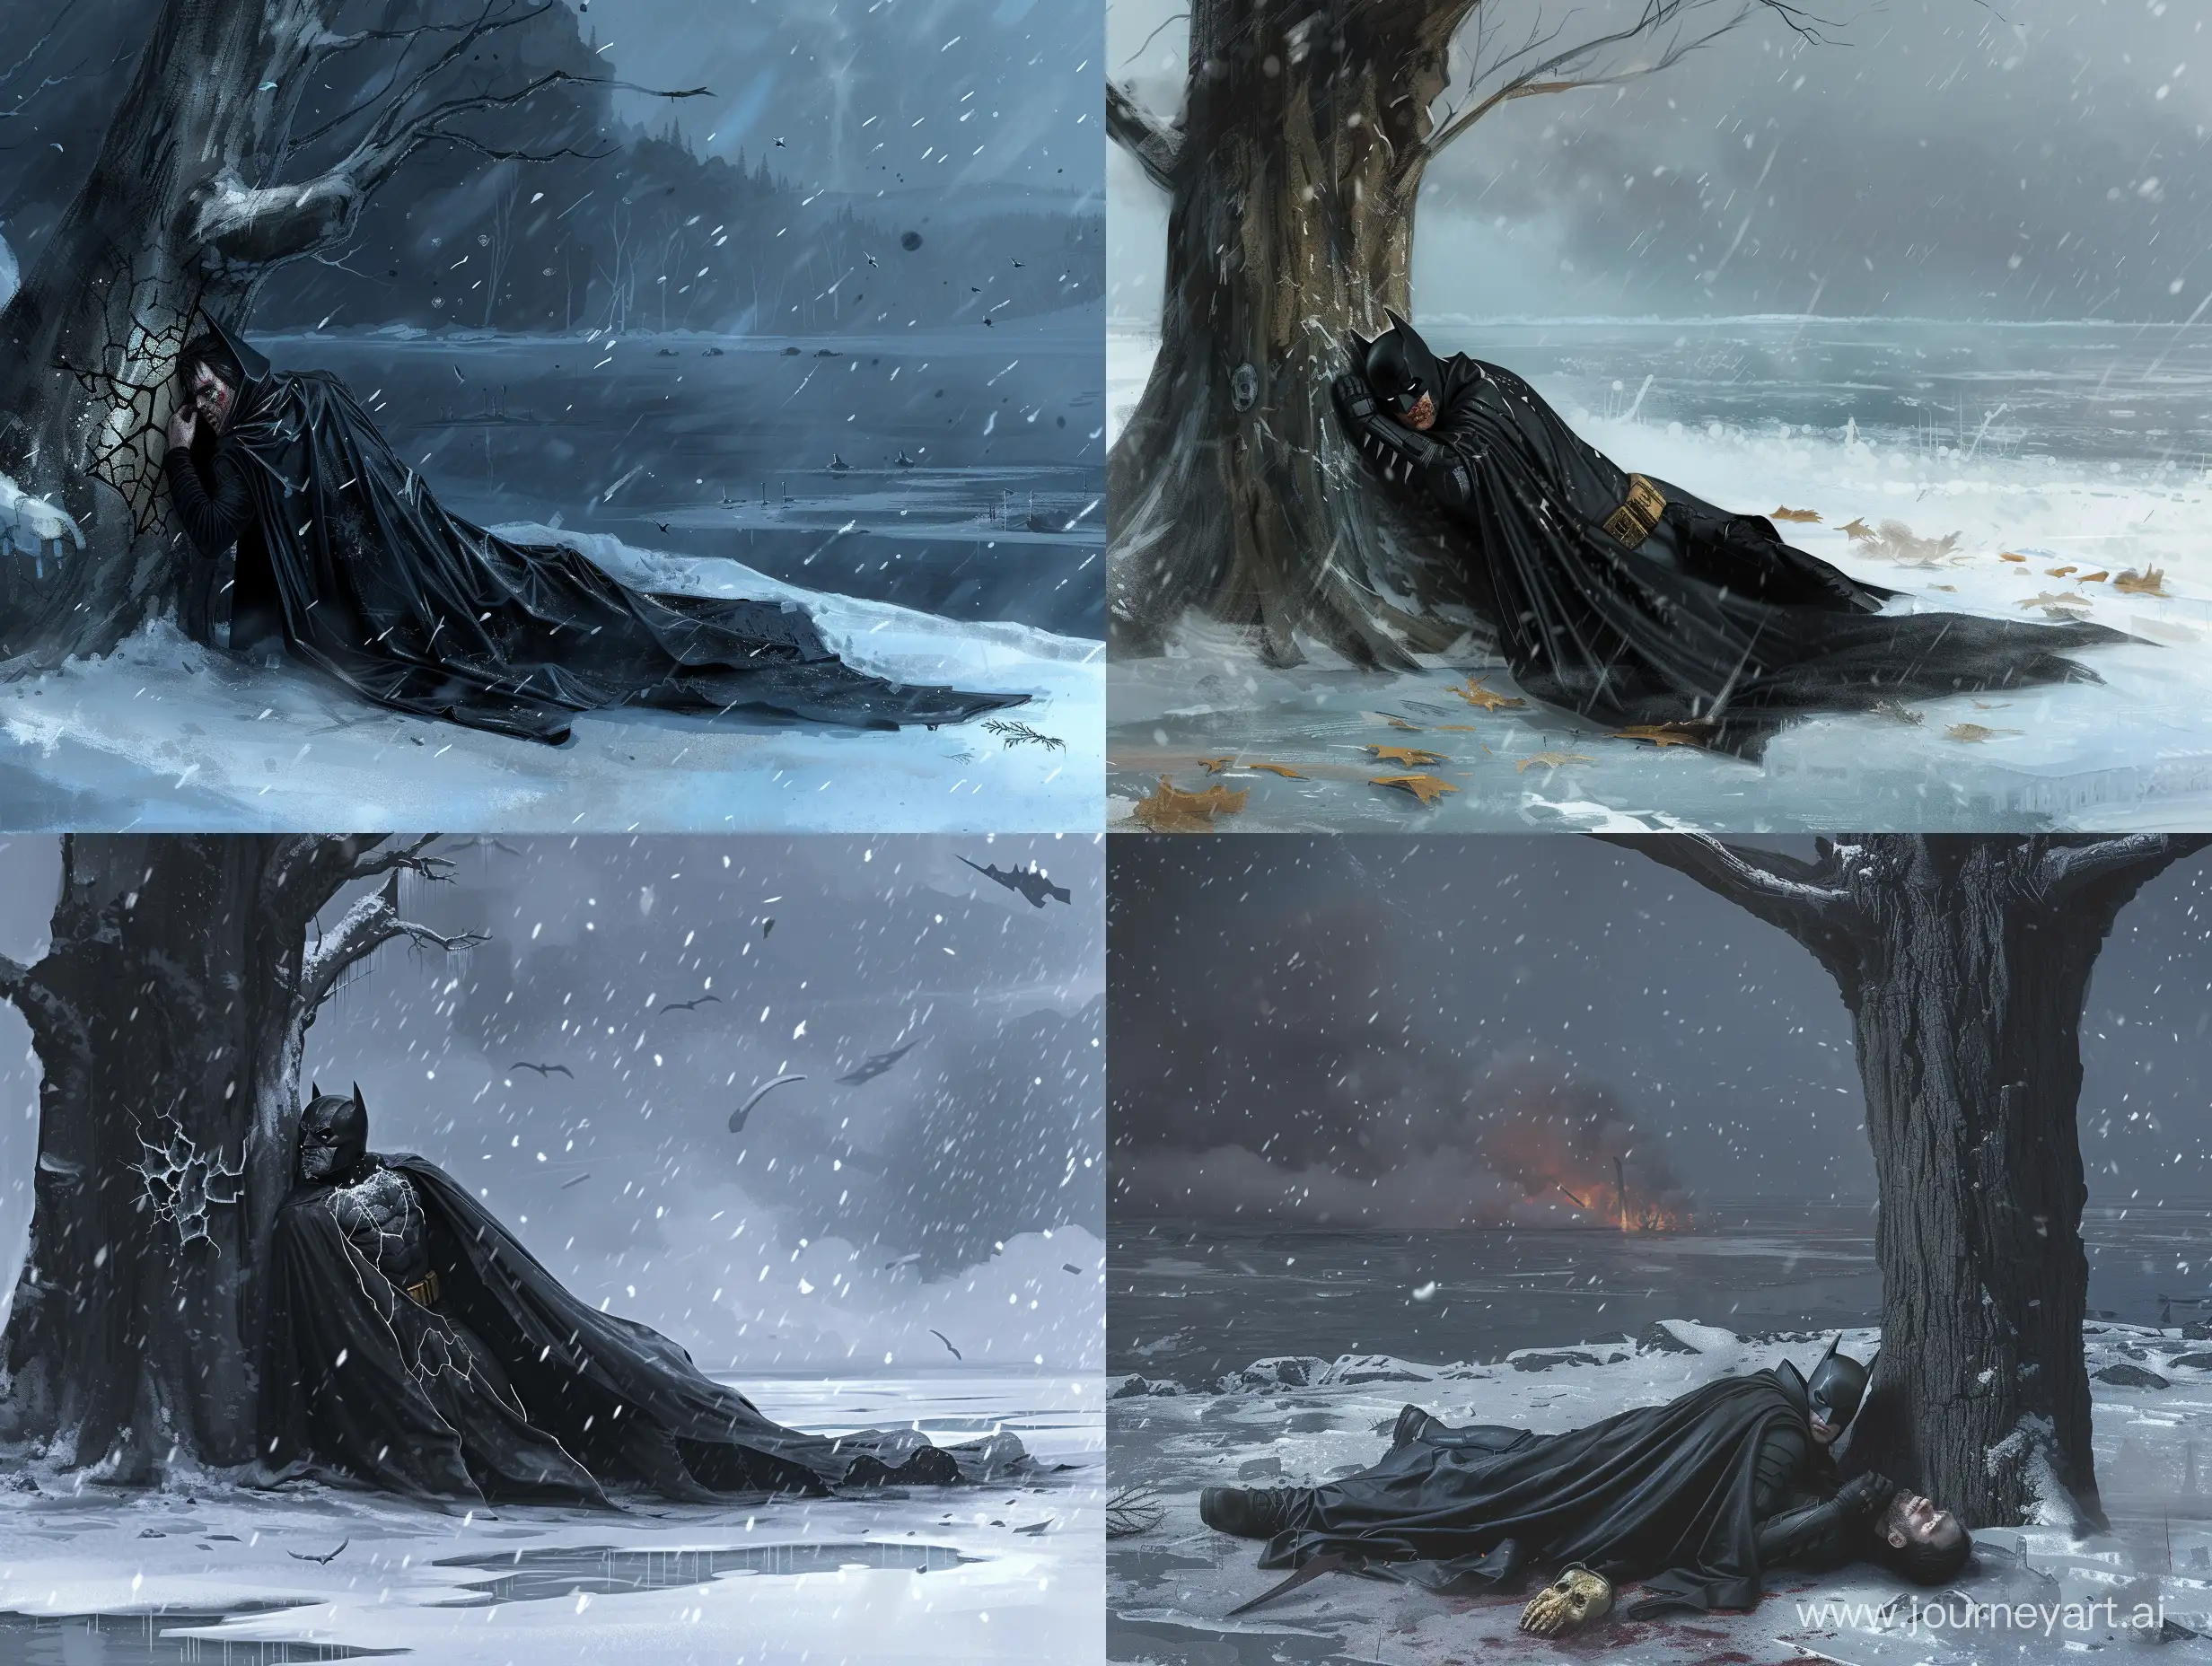 Mysterious-Heros-Standoff-Wounded-Warrior-in-Black-Cape-Suit-by-Icy-Lake